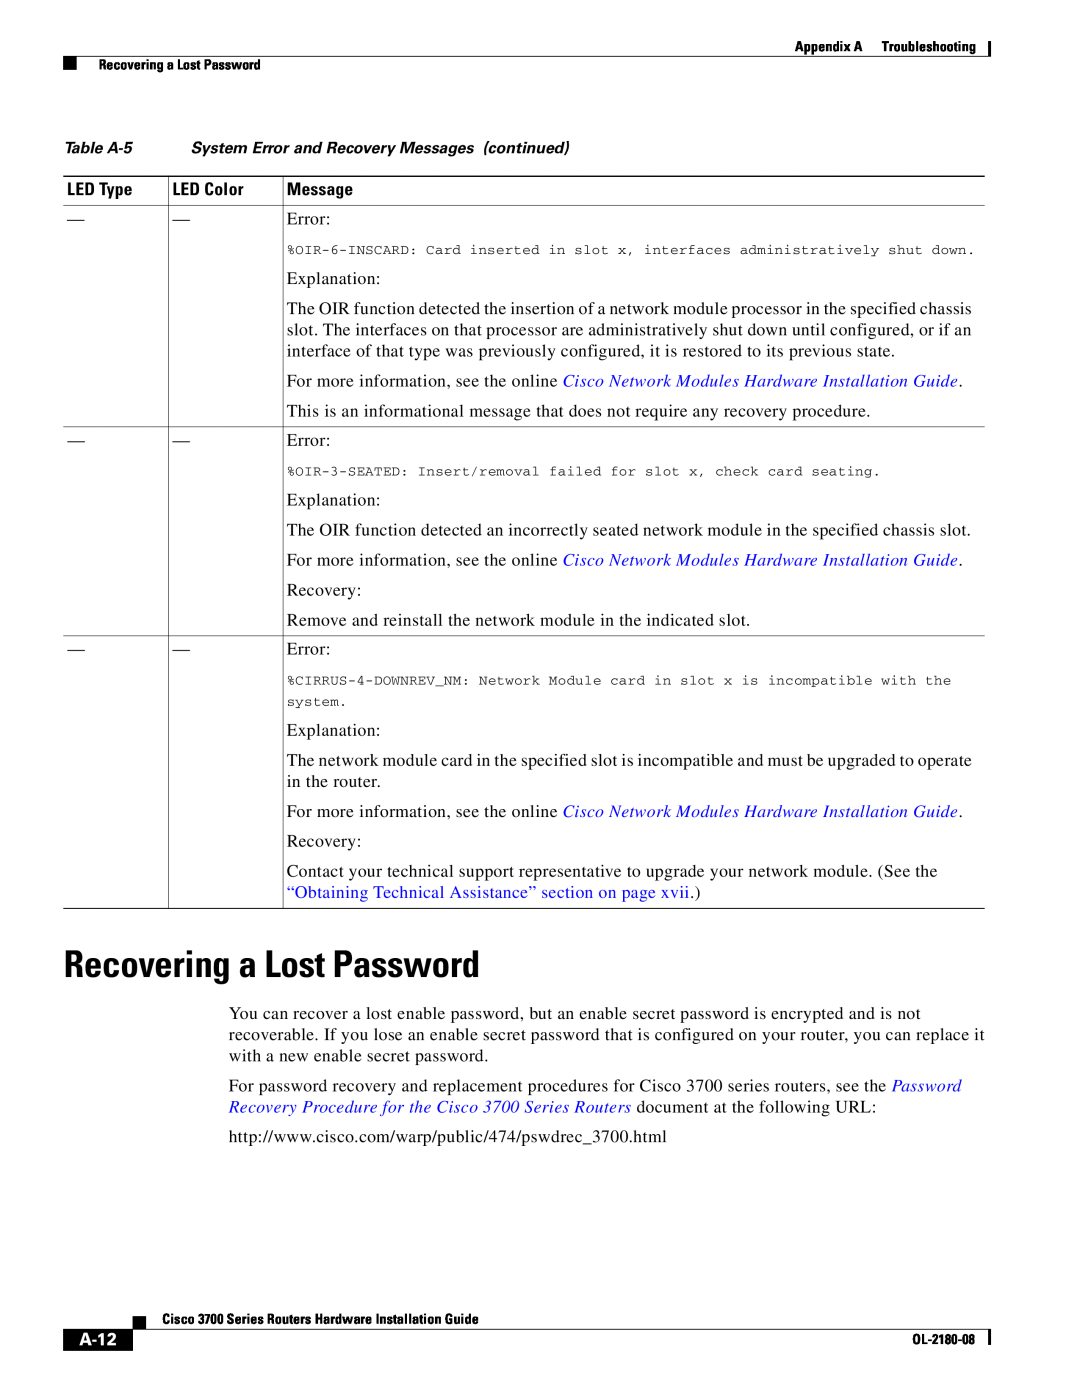 Cisco Systems 3700 Series manual Recovering a Lost Password, “Obtaining Technical Assistance” section on page, A-12 